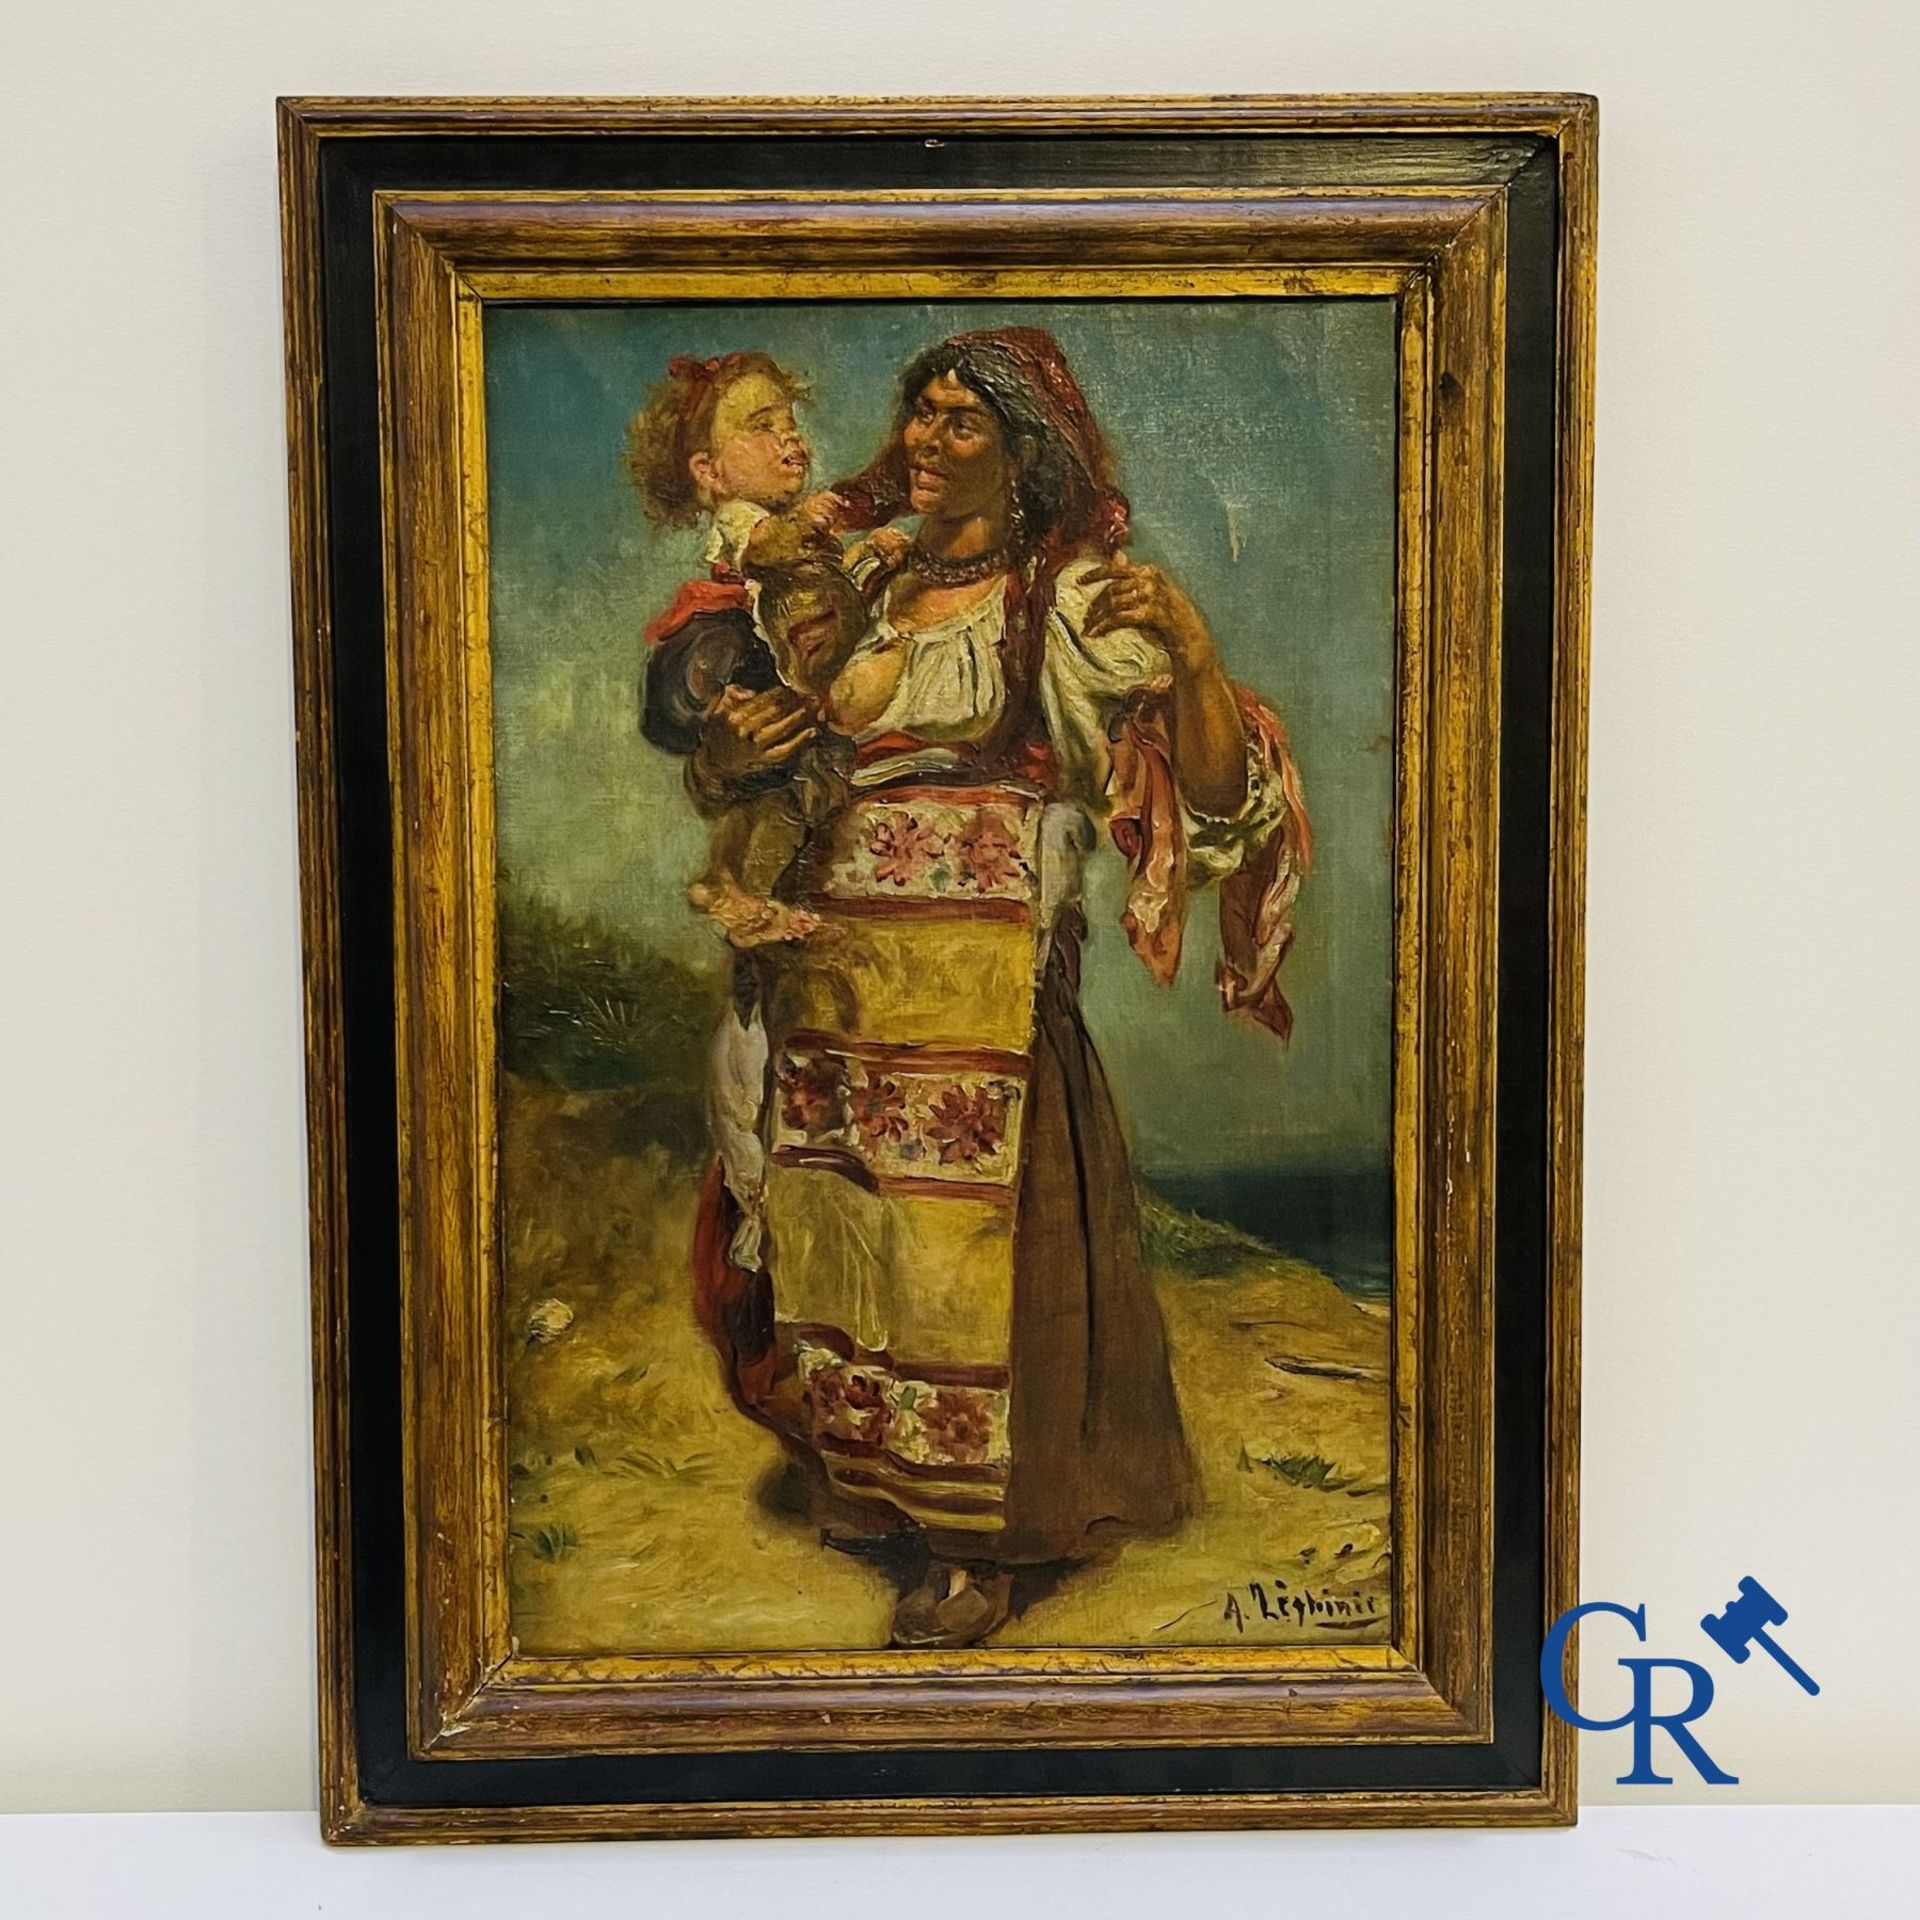 Painting: oil on canvas, illegibly signed. Gypsy woman with child.